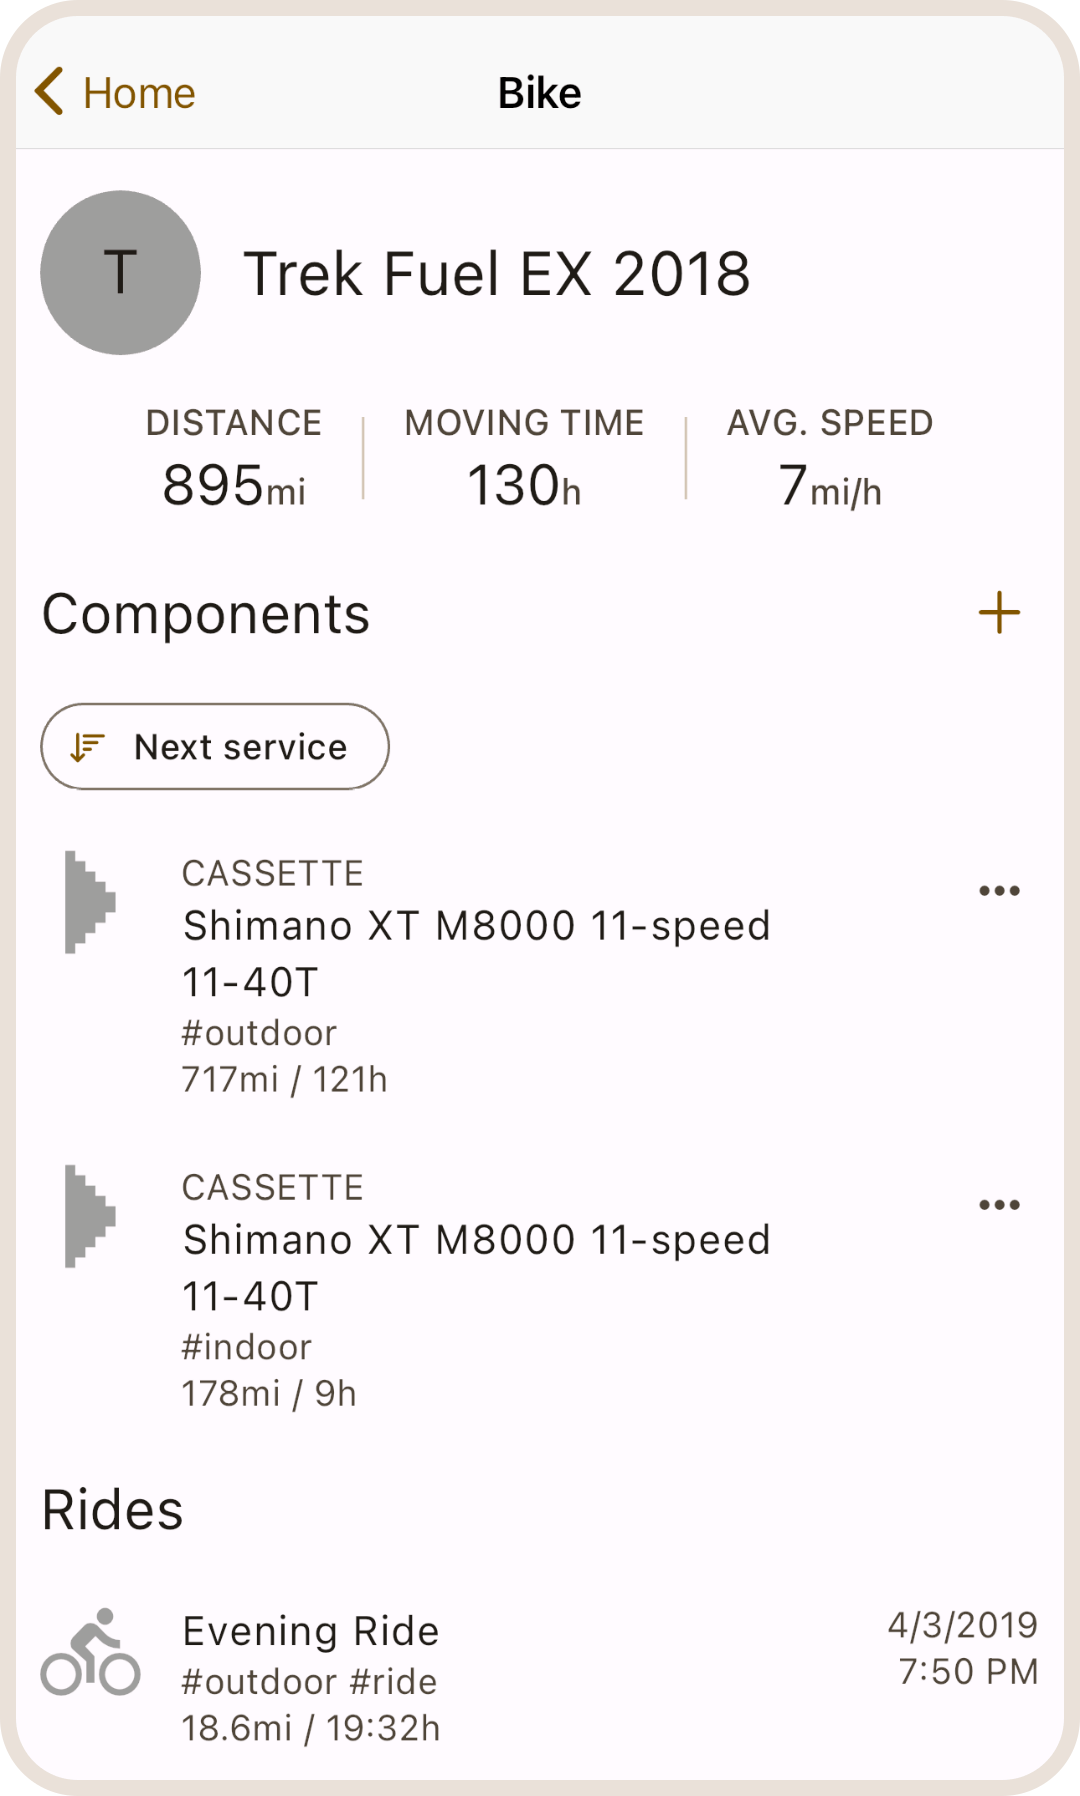 Installed cassettes for indoor and outdoor in ProBikeGarage app